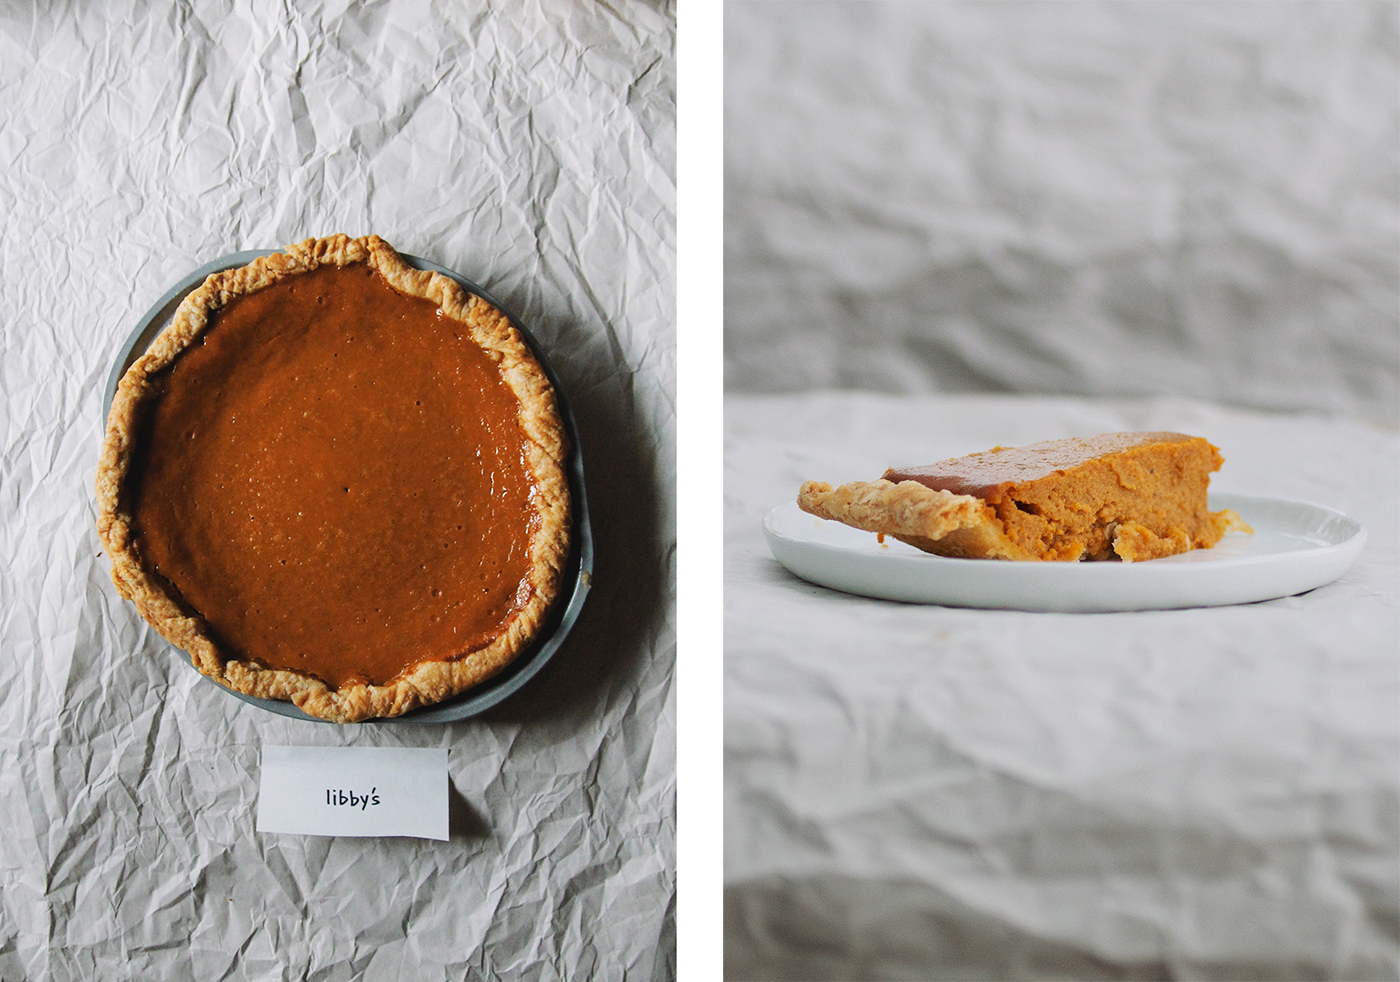 From left to right: Overhead view and sideview of Libby's pumpkin pie recipe